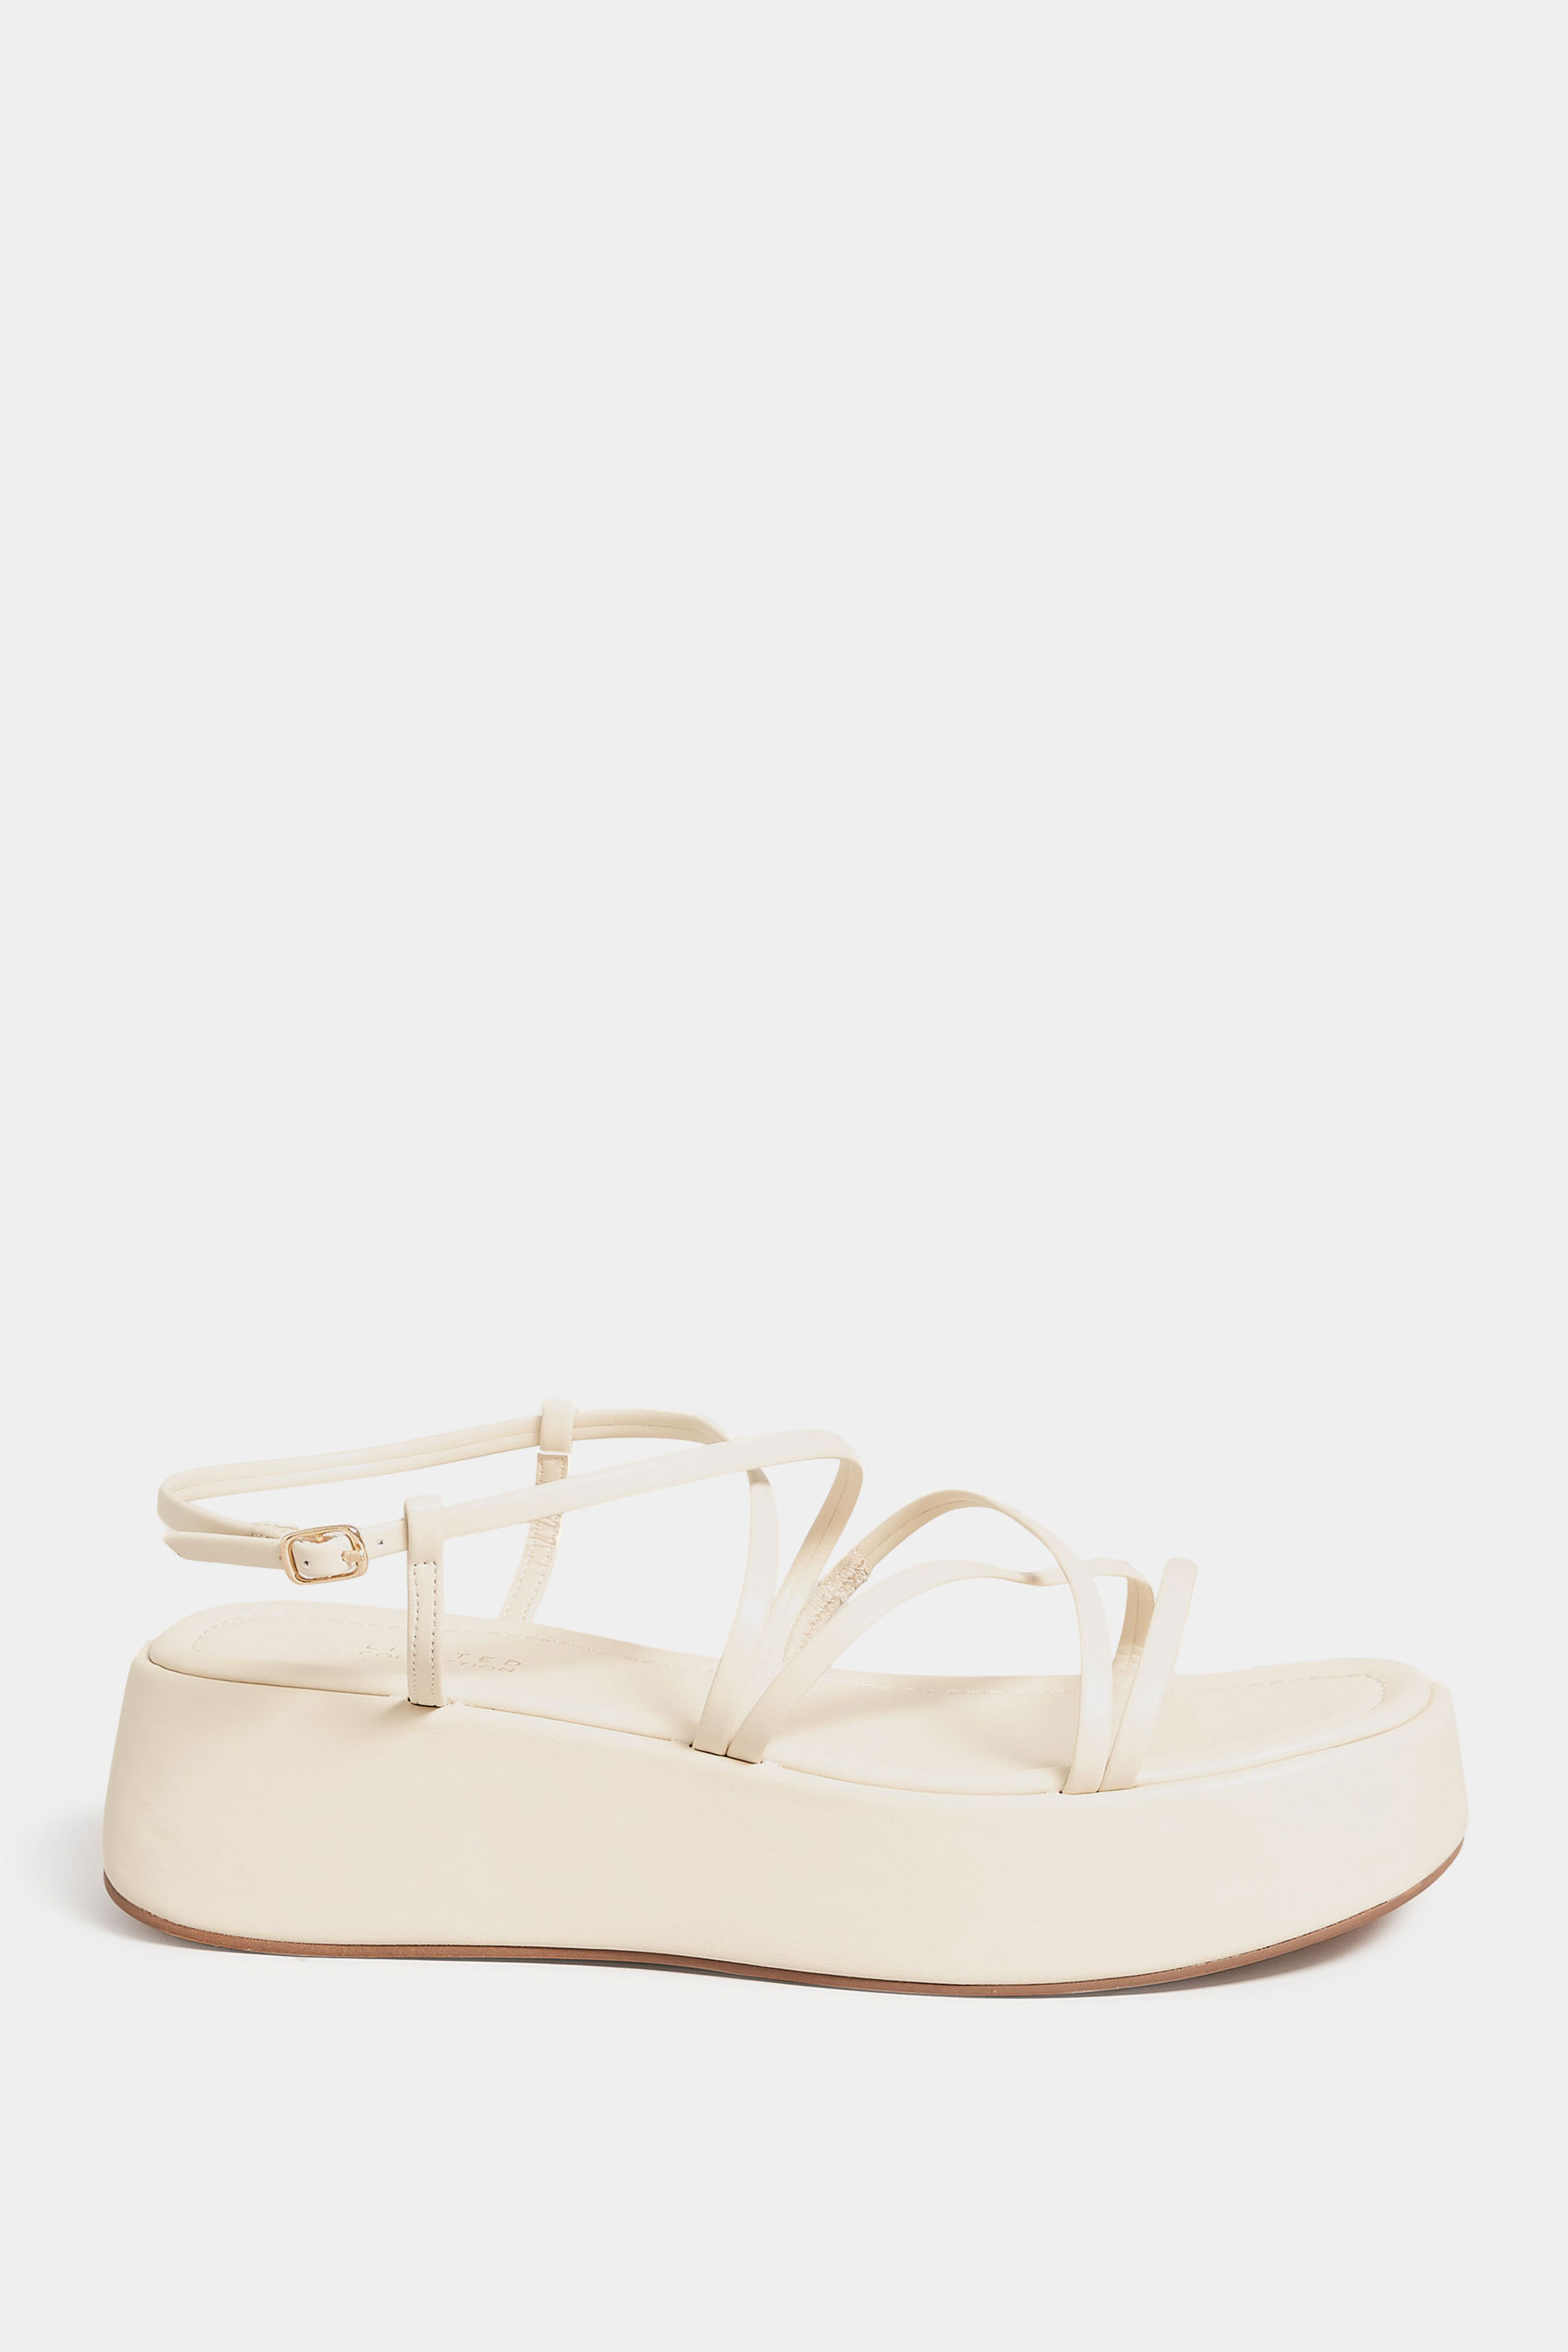 LIMITED COLLECTION White Strappy Flatform Sandals in Extra Wide EEE Fit | Yours Clothing 3